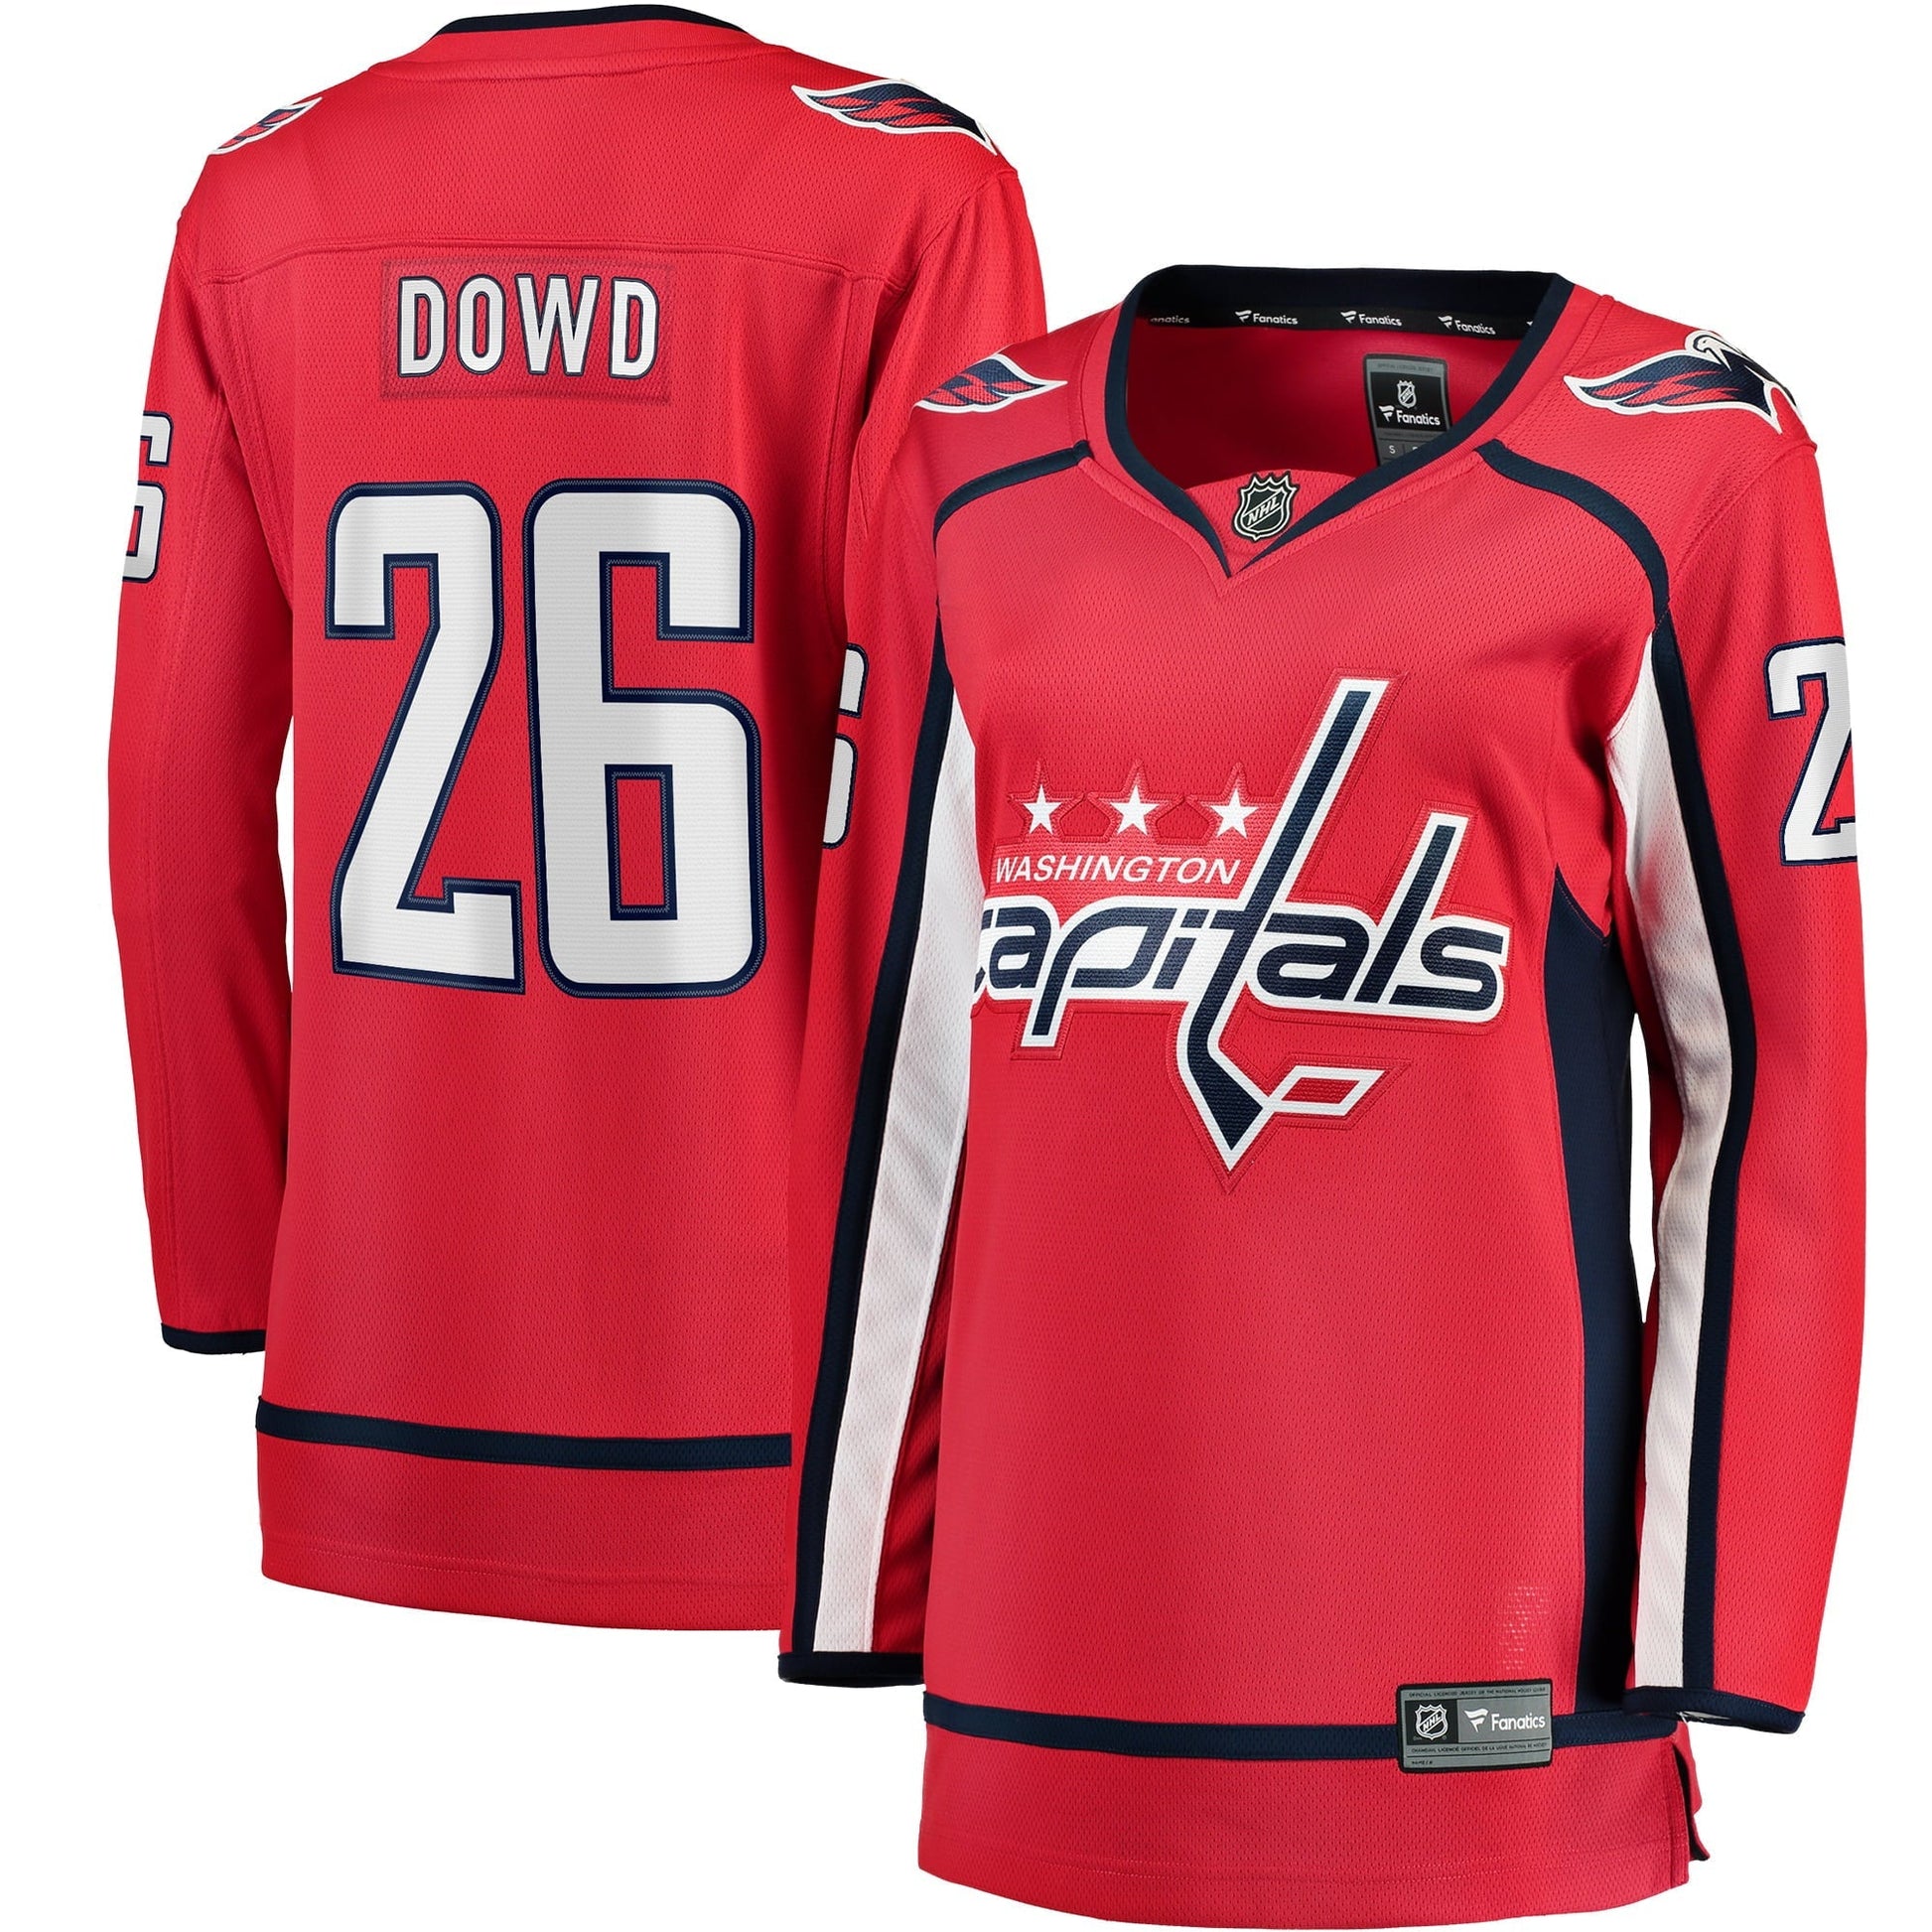 My Jersey Collection: Washington Capitals 